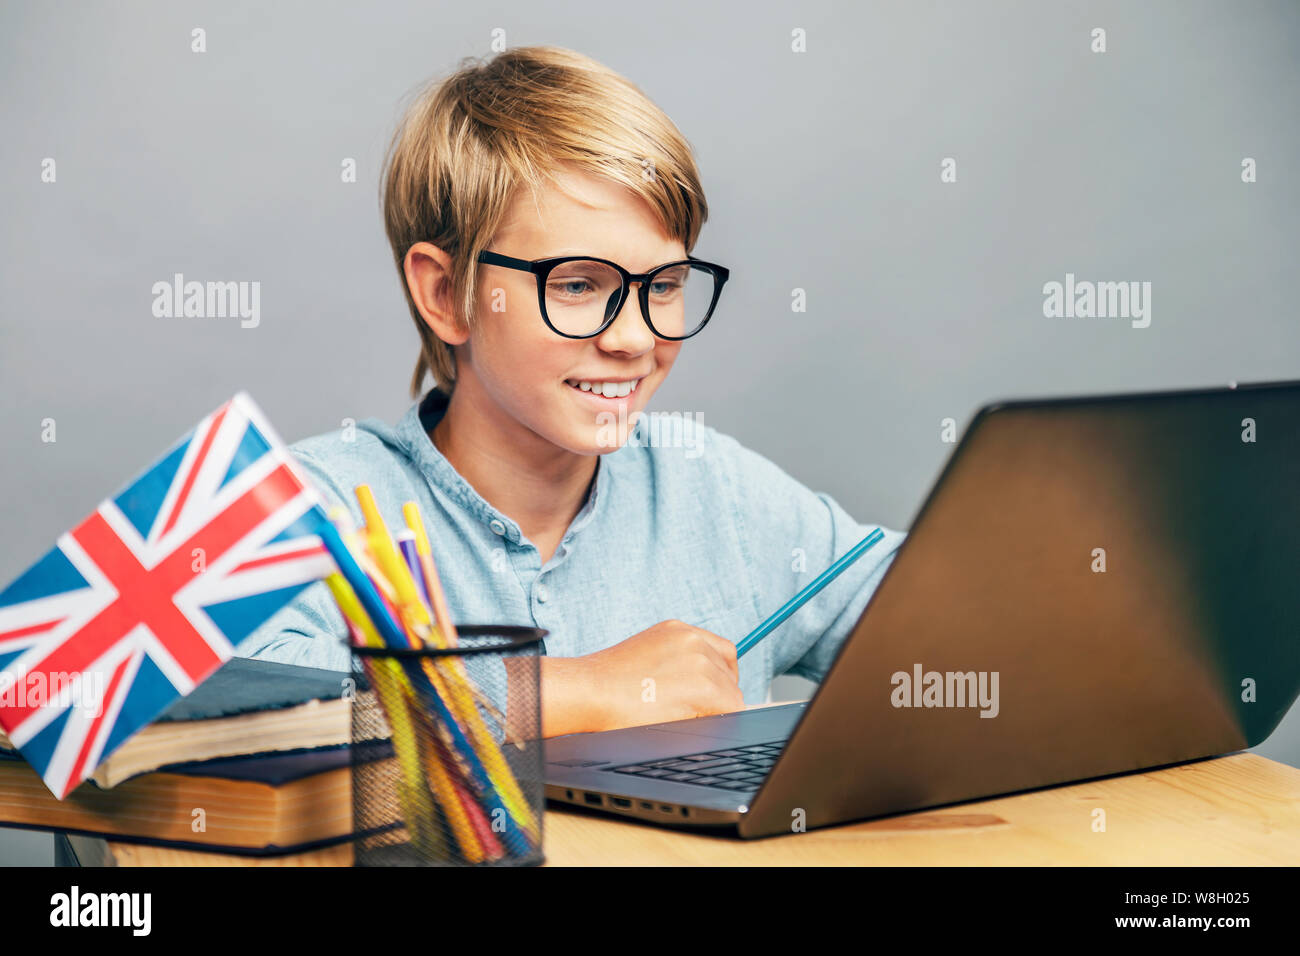 Smiling schoolboy in glasses studying English by the laptop Stock Photo